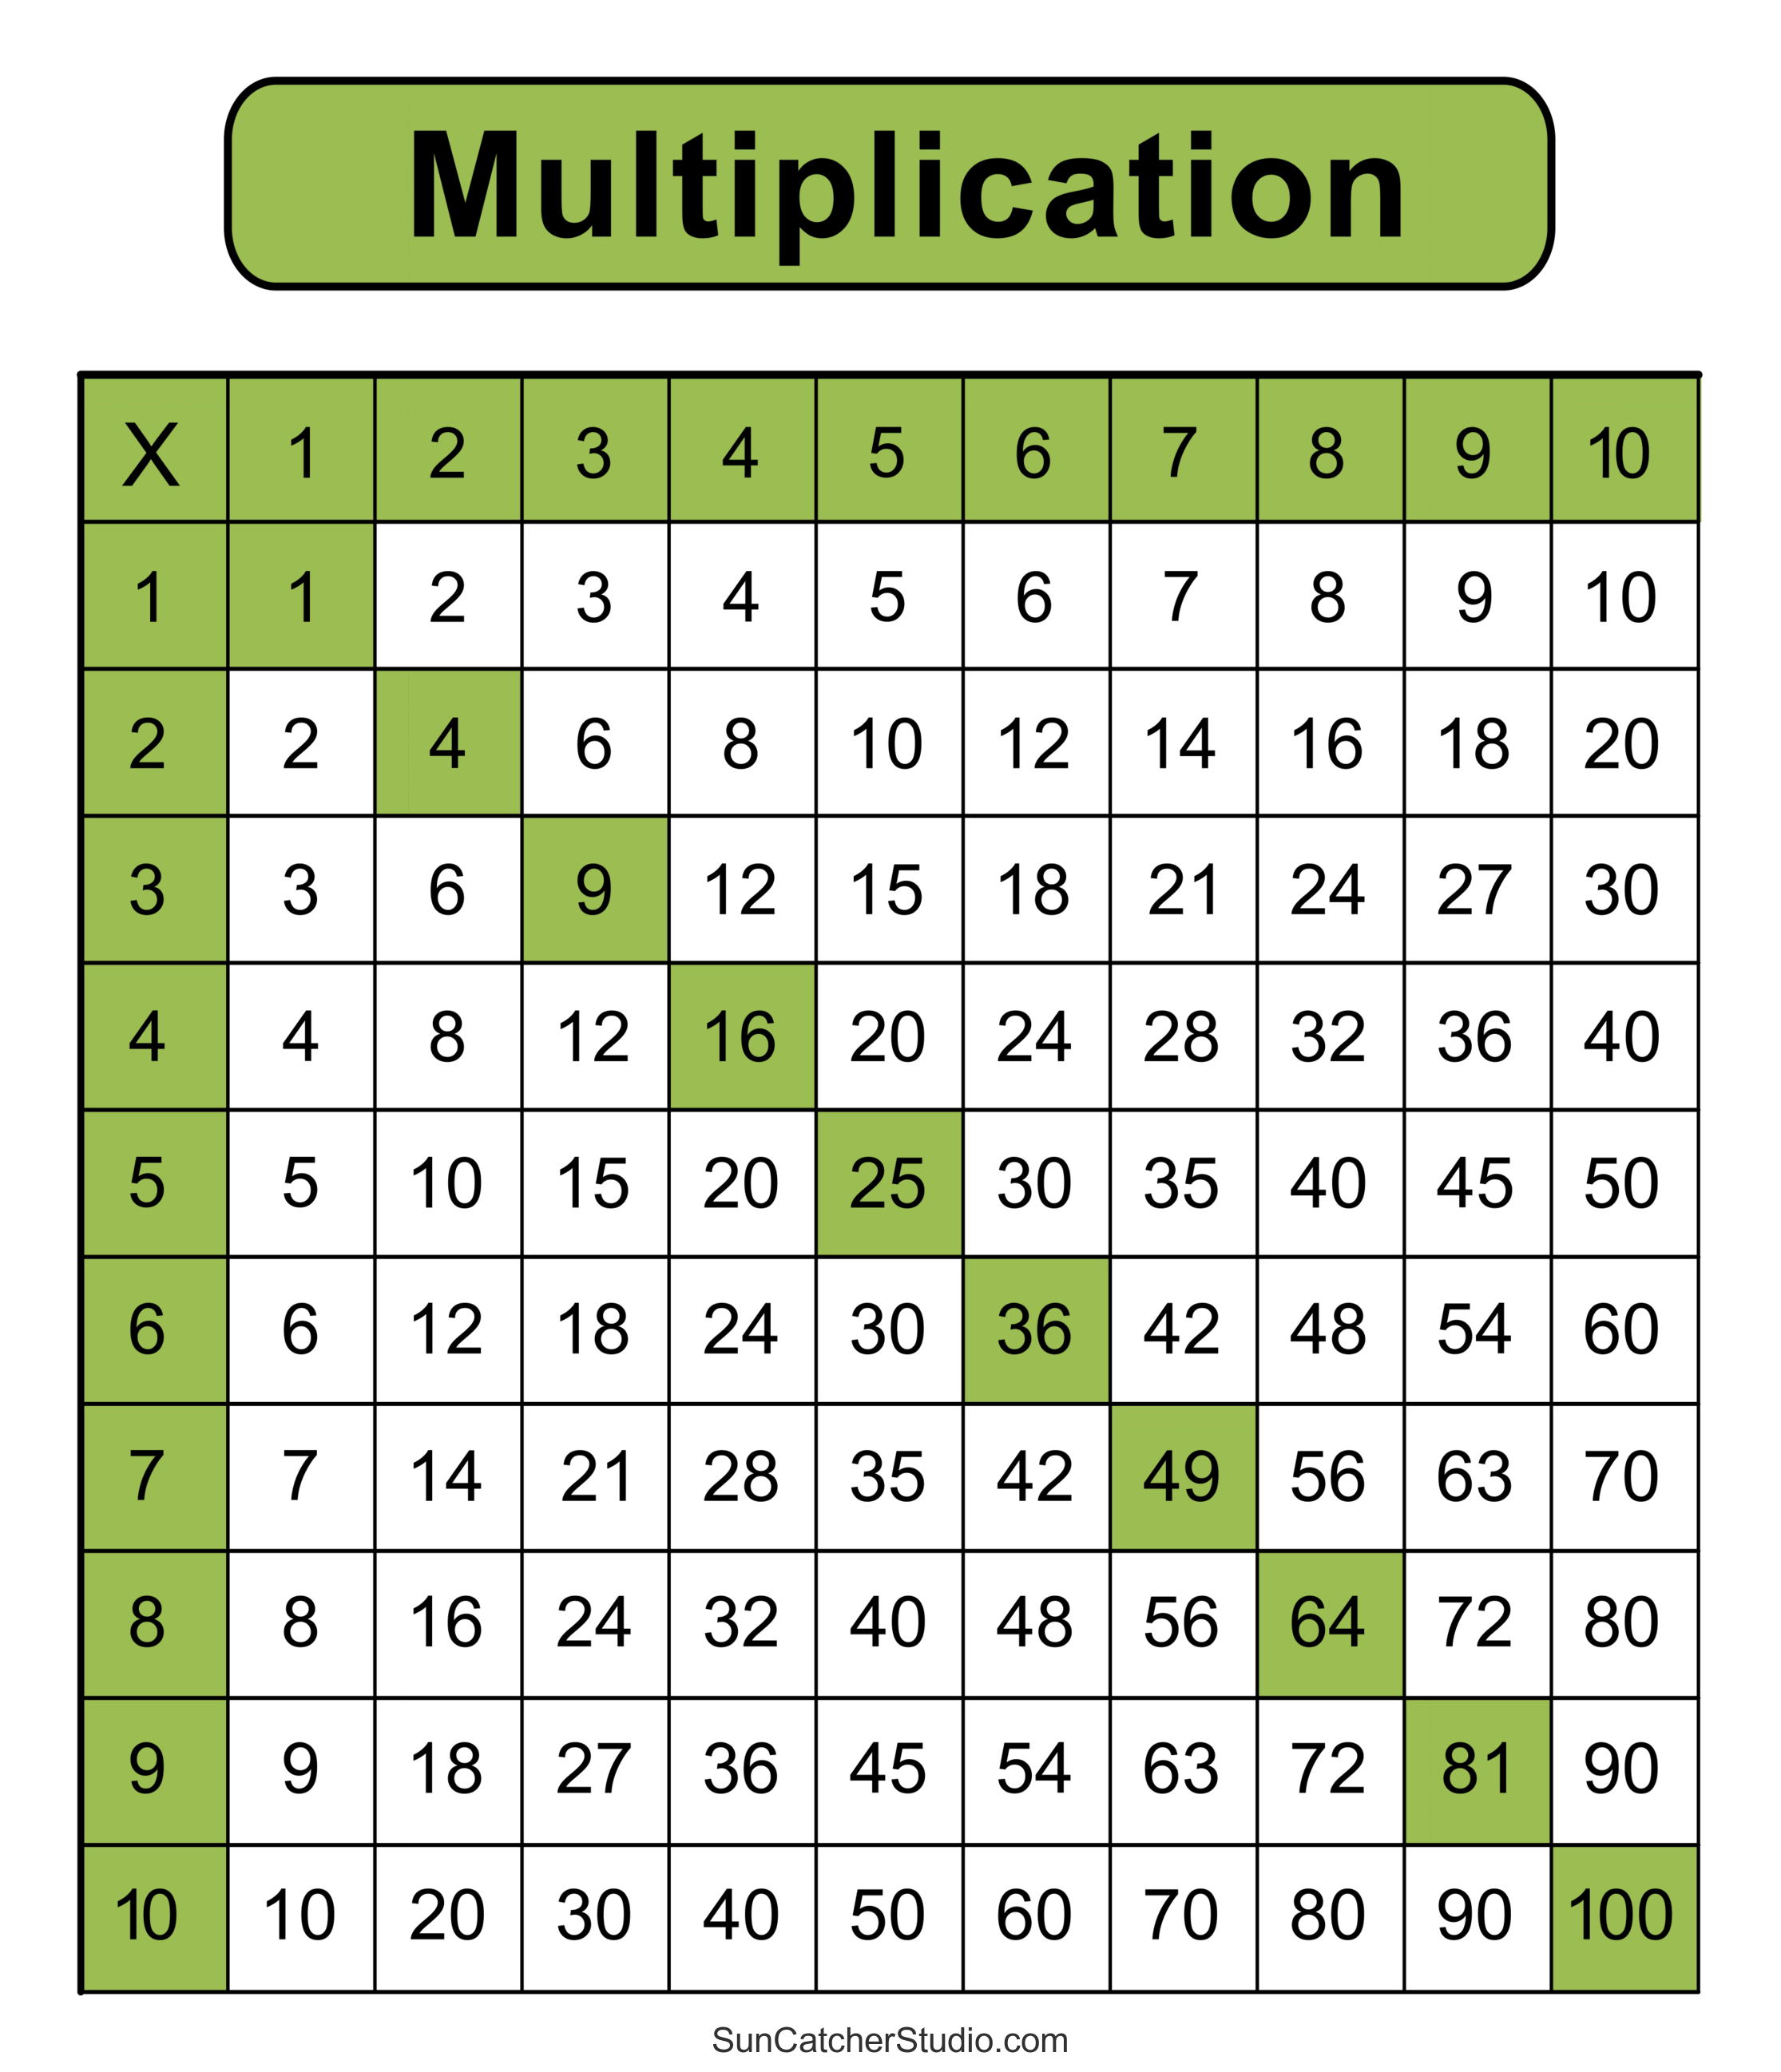 Multiplication Table Pdf 1 100 Chart Infoupdate org